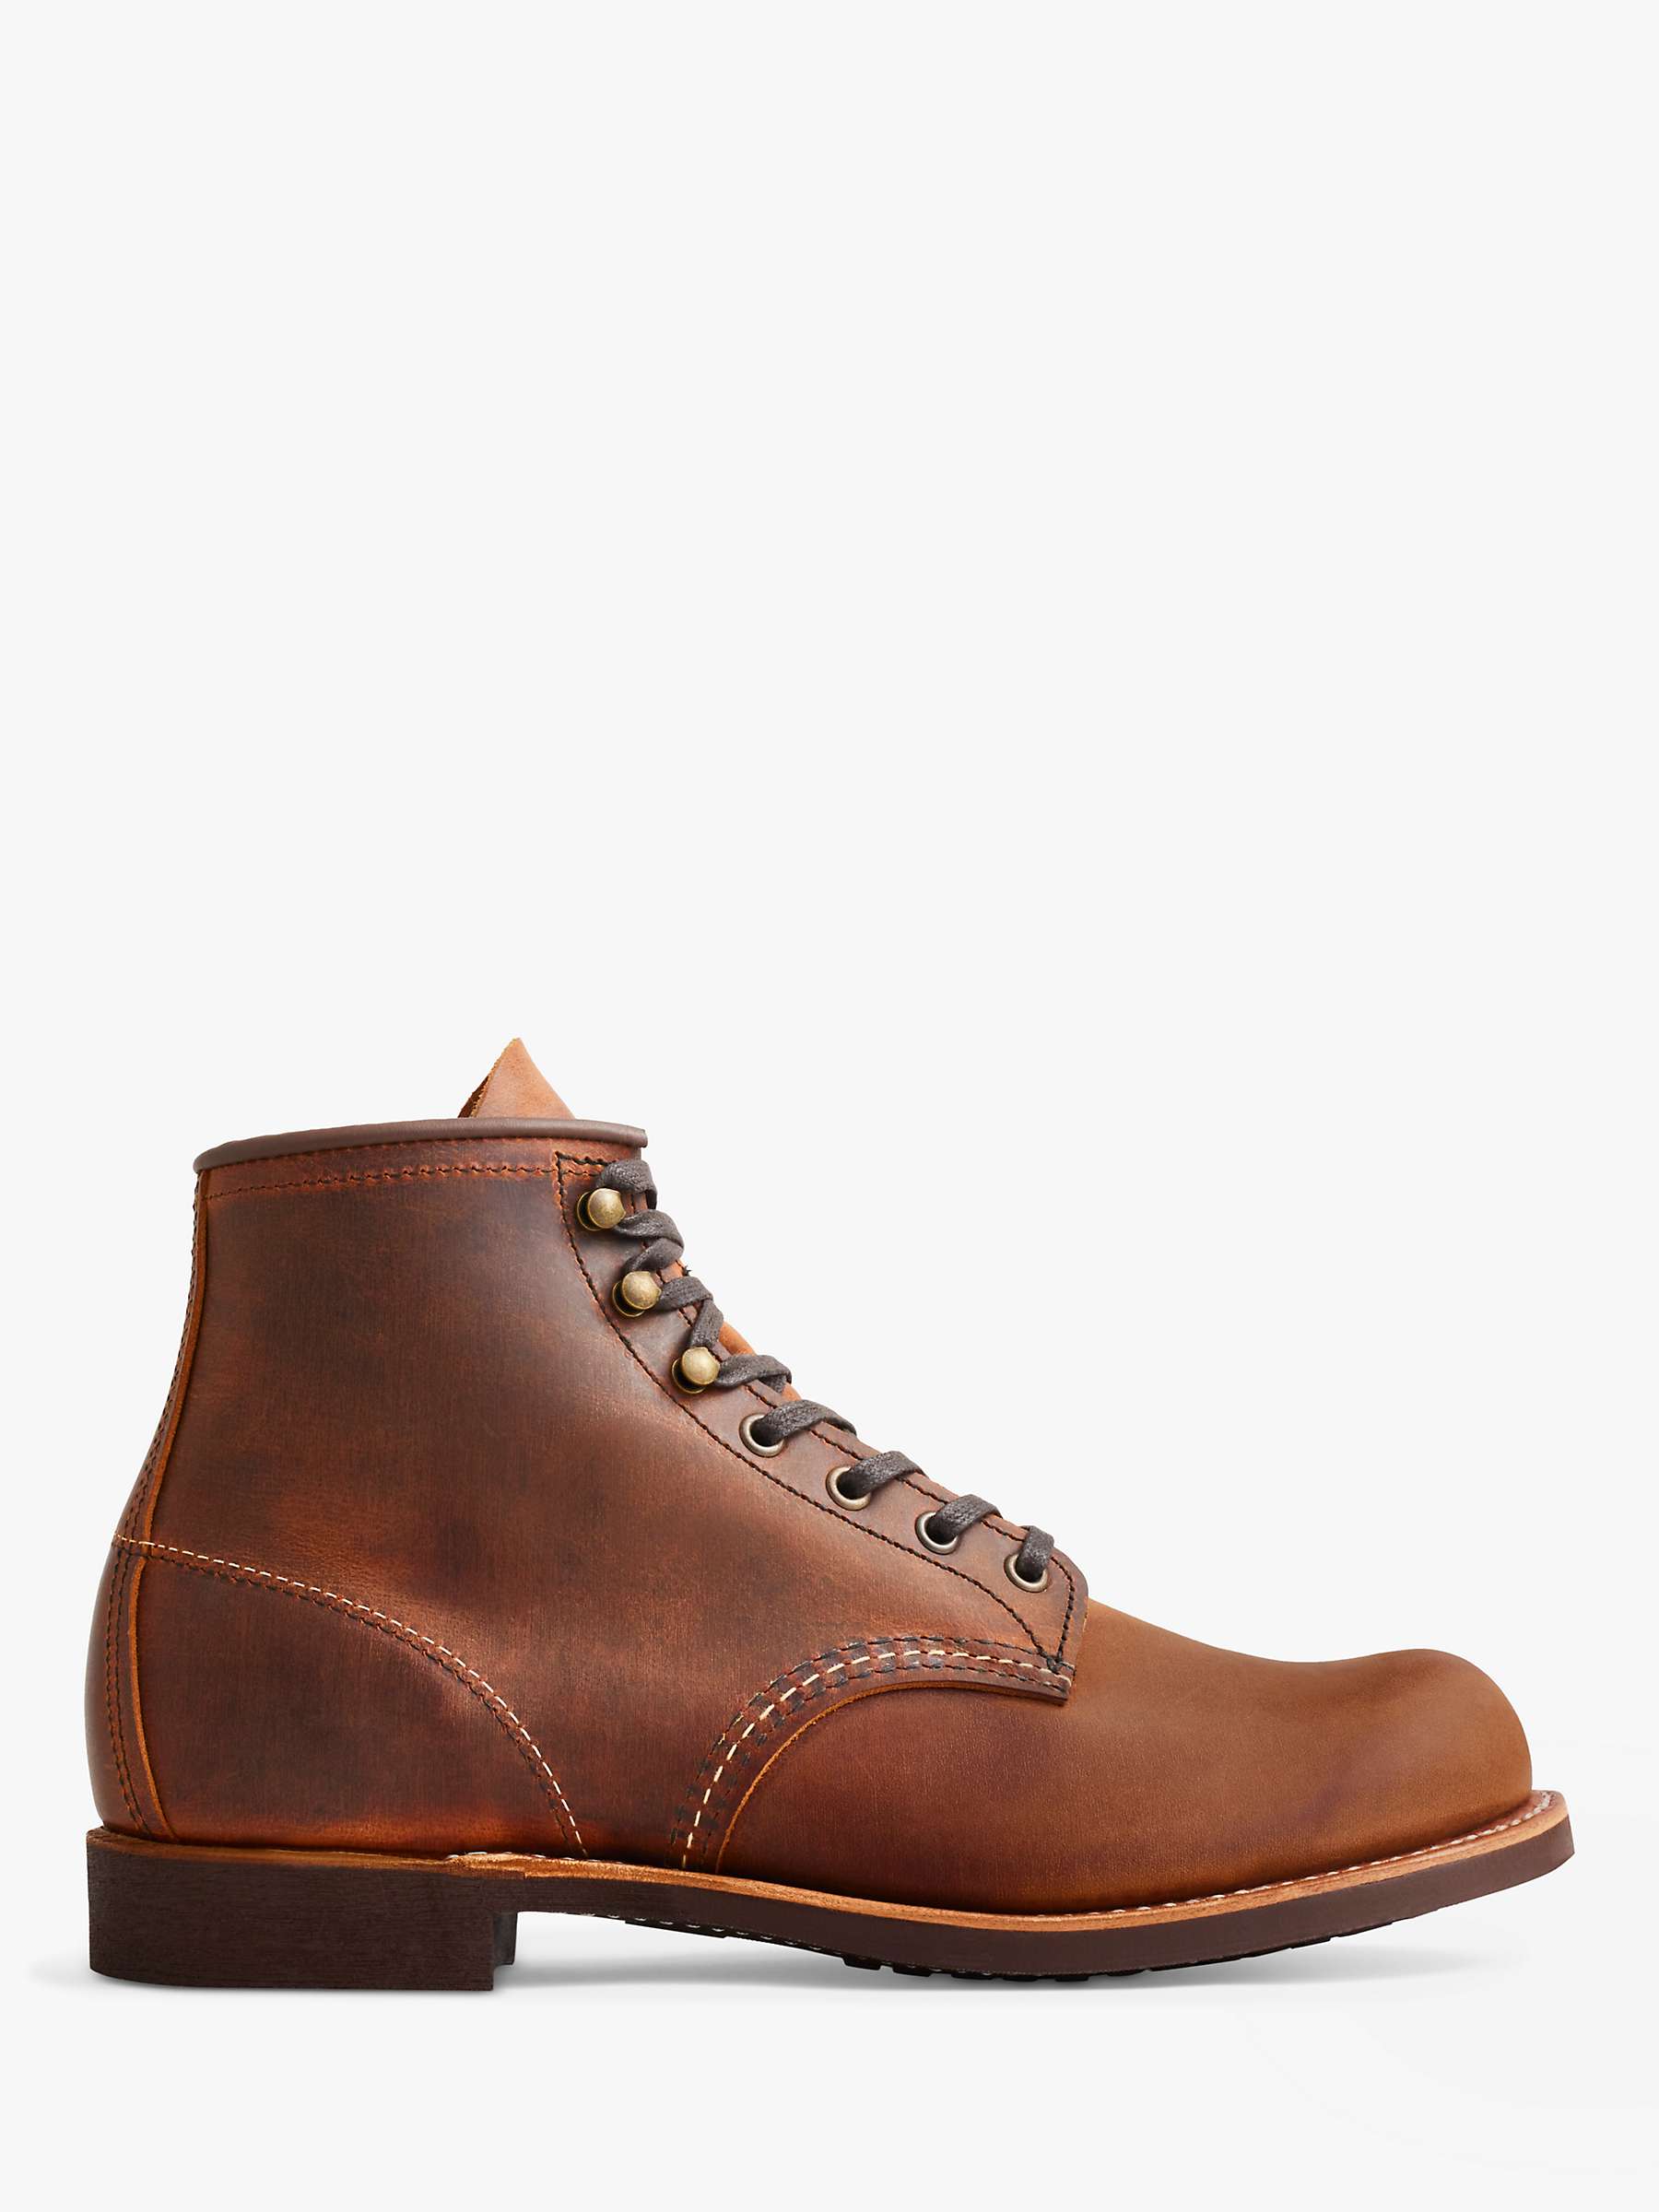 Buy Red Wing Blacksmith Leather Lace-Up Boots, Copper Rough & Tuff Online at johnlewis.com